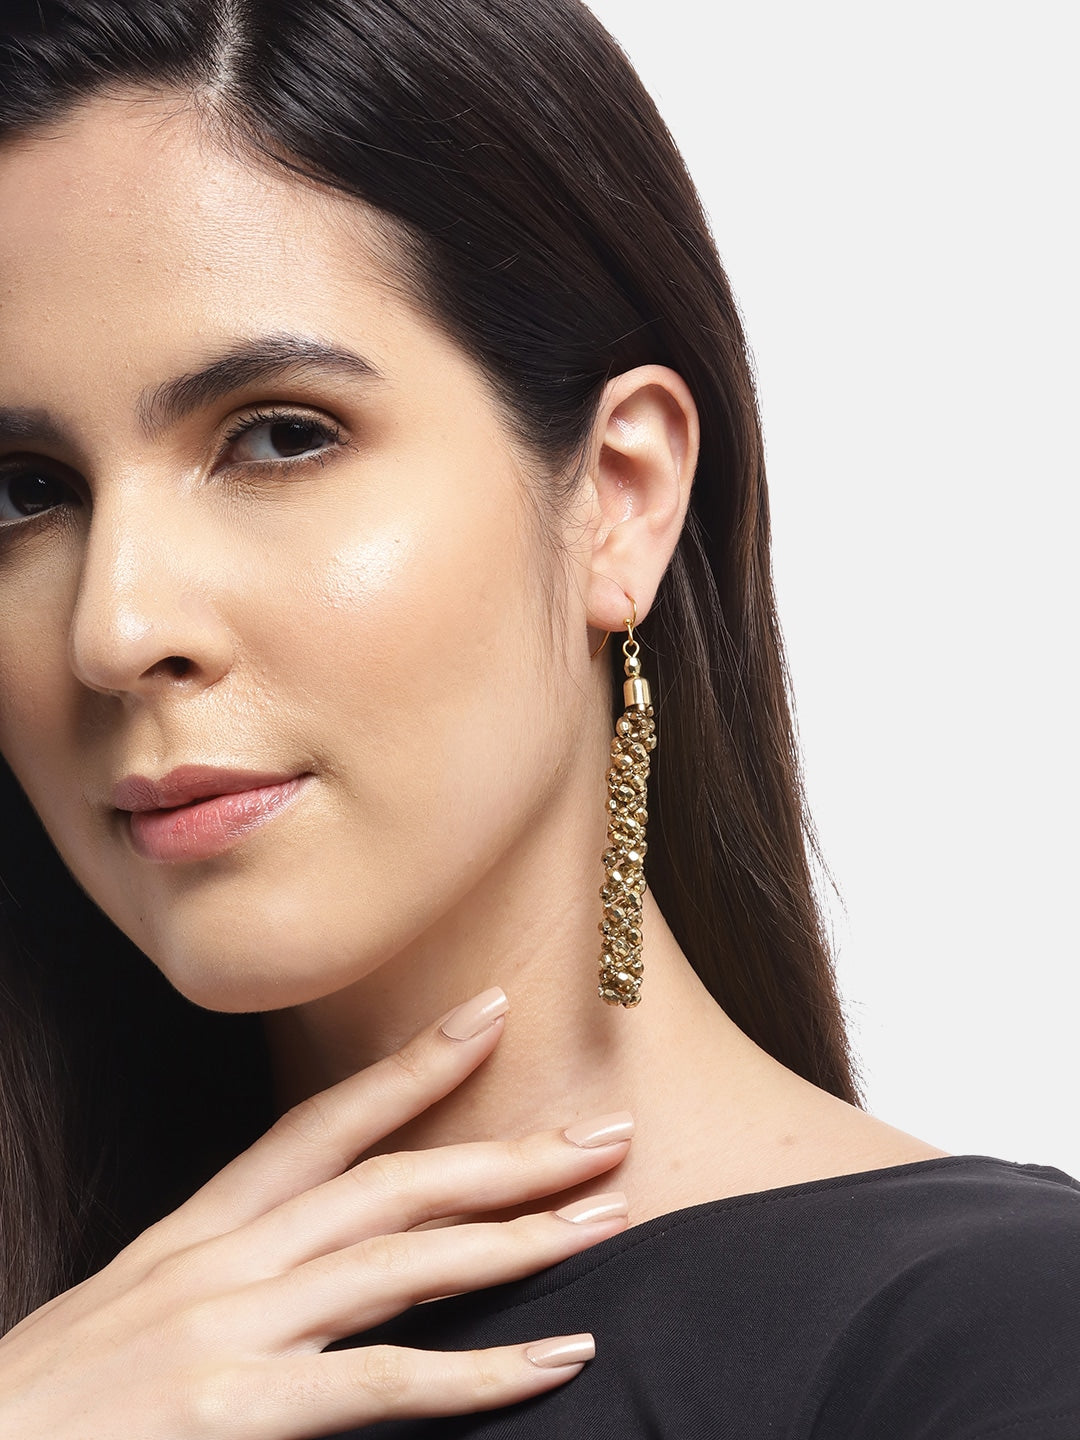 Gold-Plated Contemporary Drop Earrings